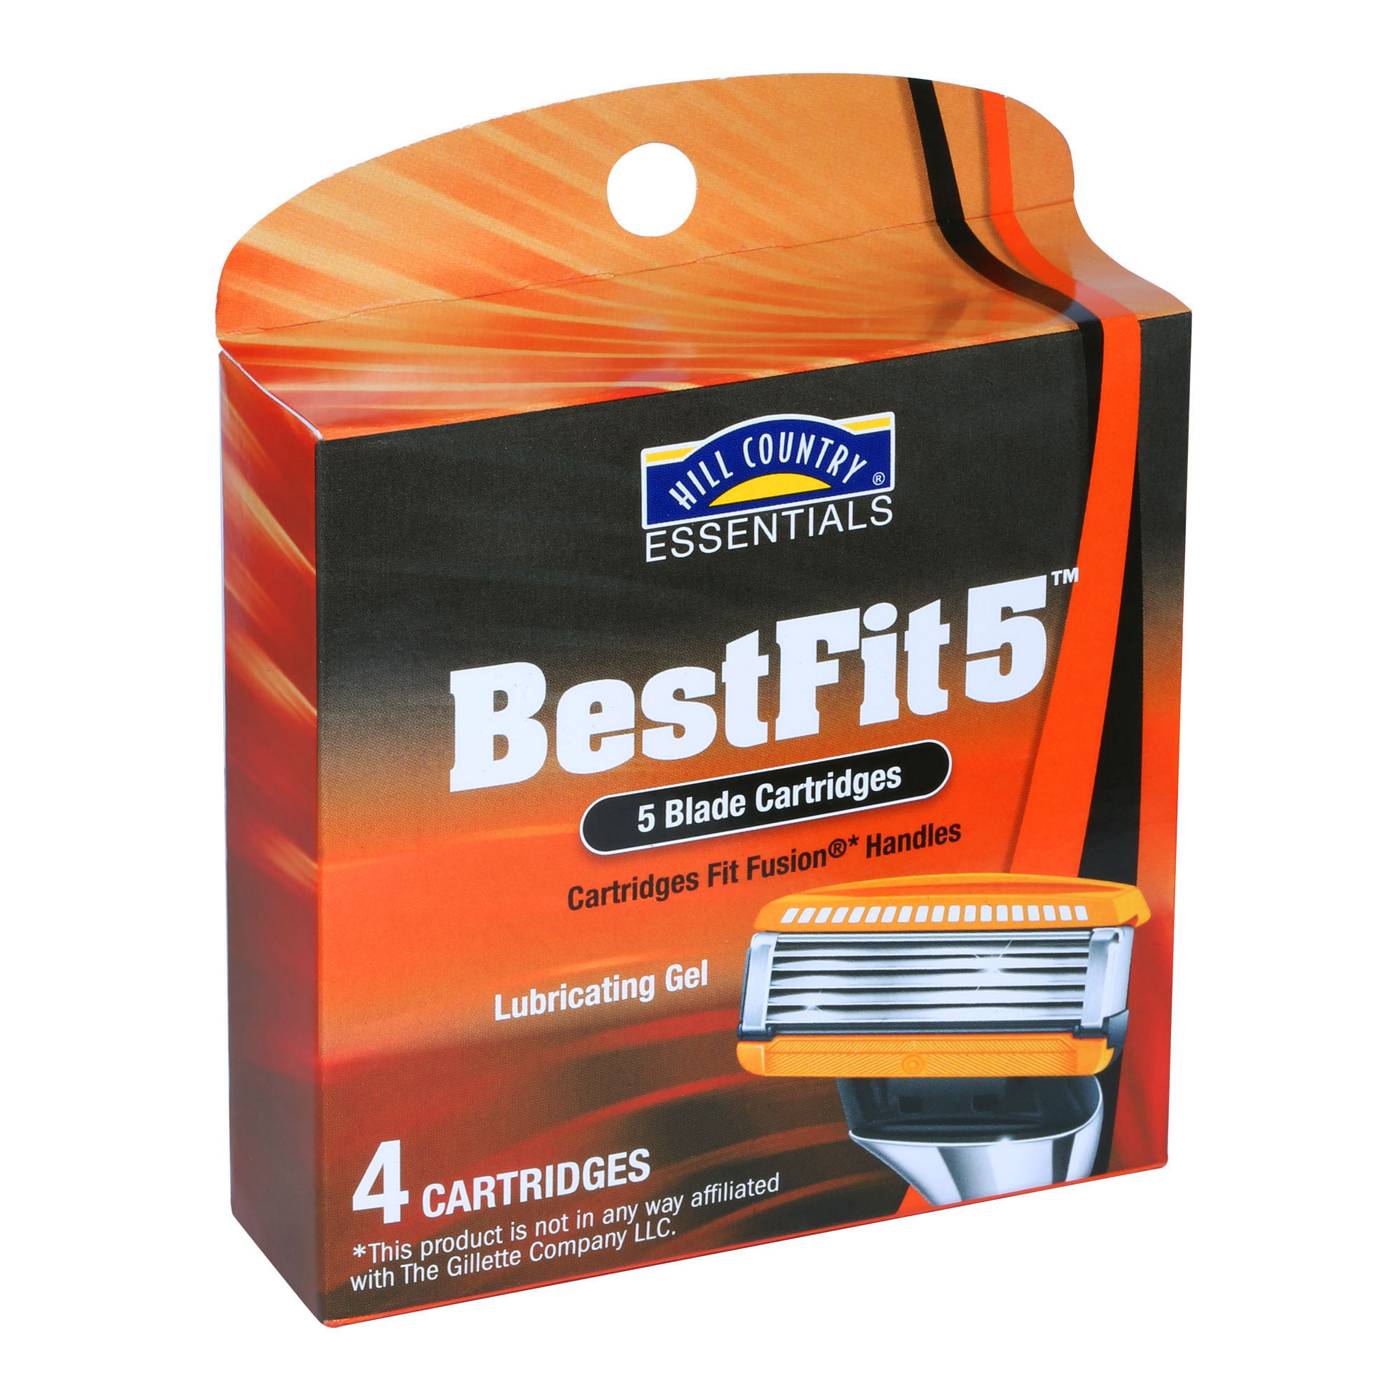 Hill Country Essentials BestFit5 Five Blade Refill Cartridges; image 1 of 6